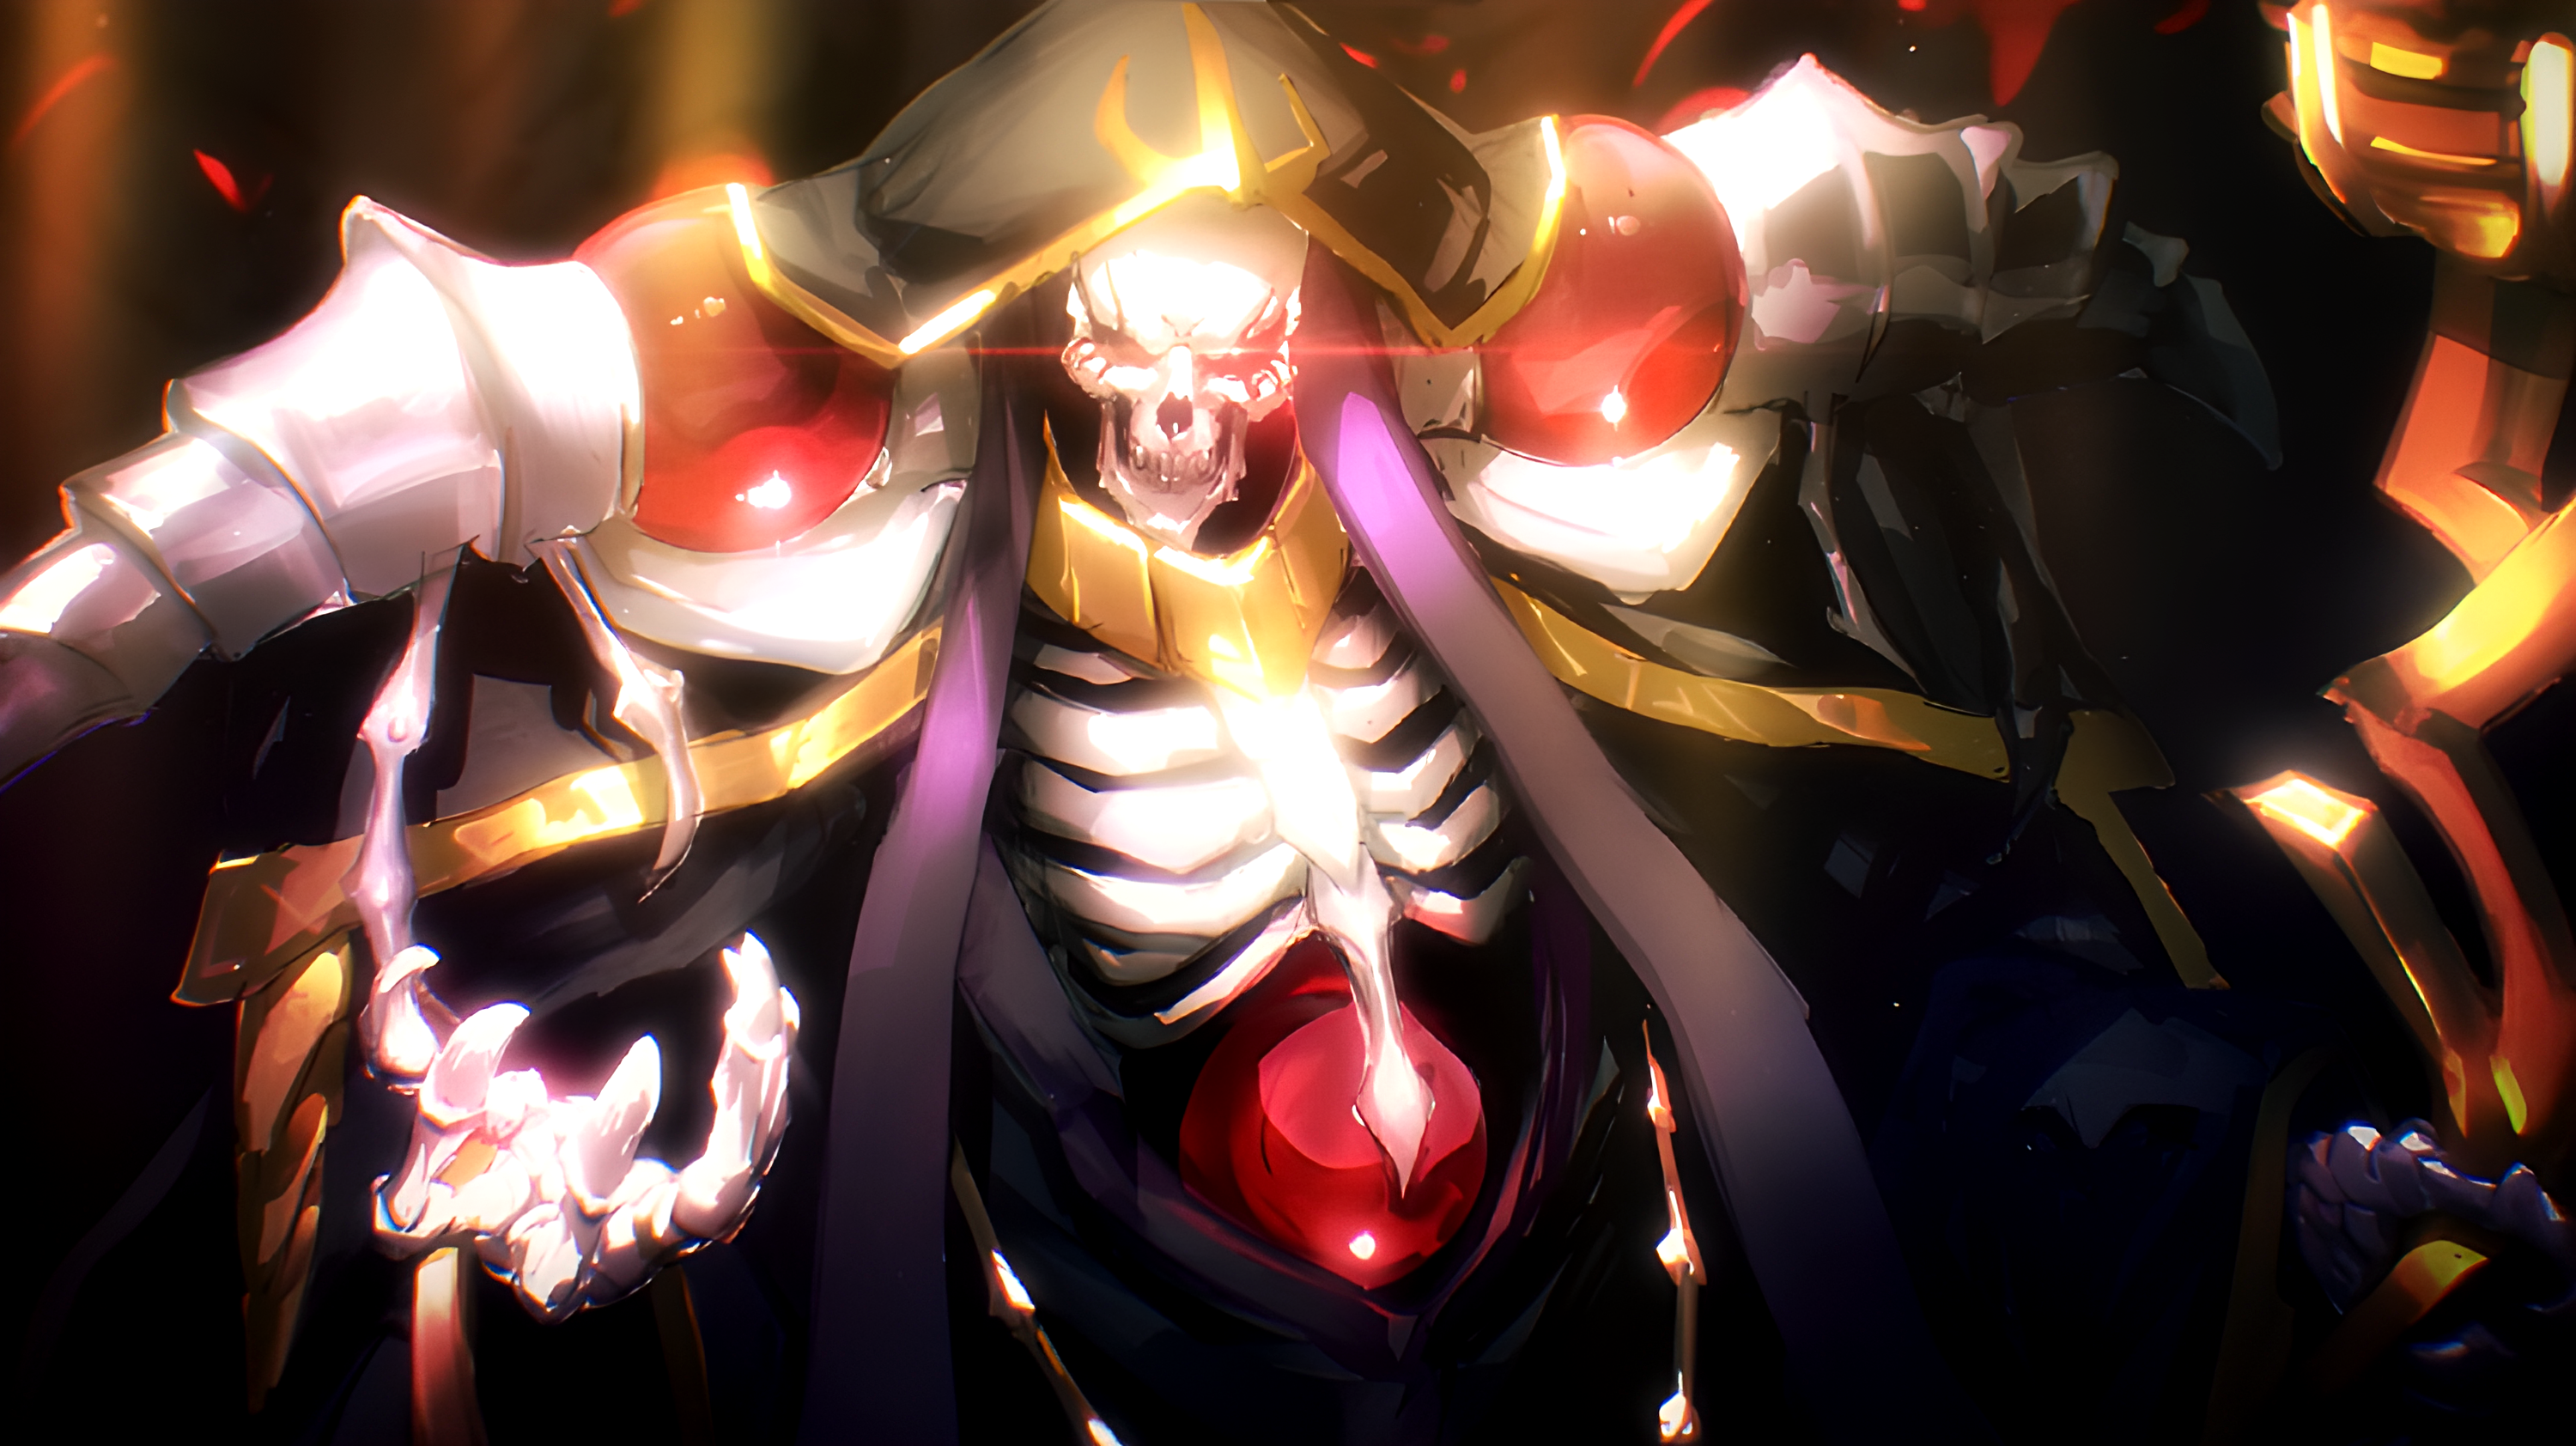 Overlord Anime Wallpaper by corphish2 on DeviantArt